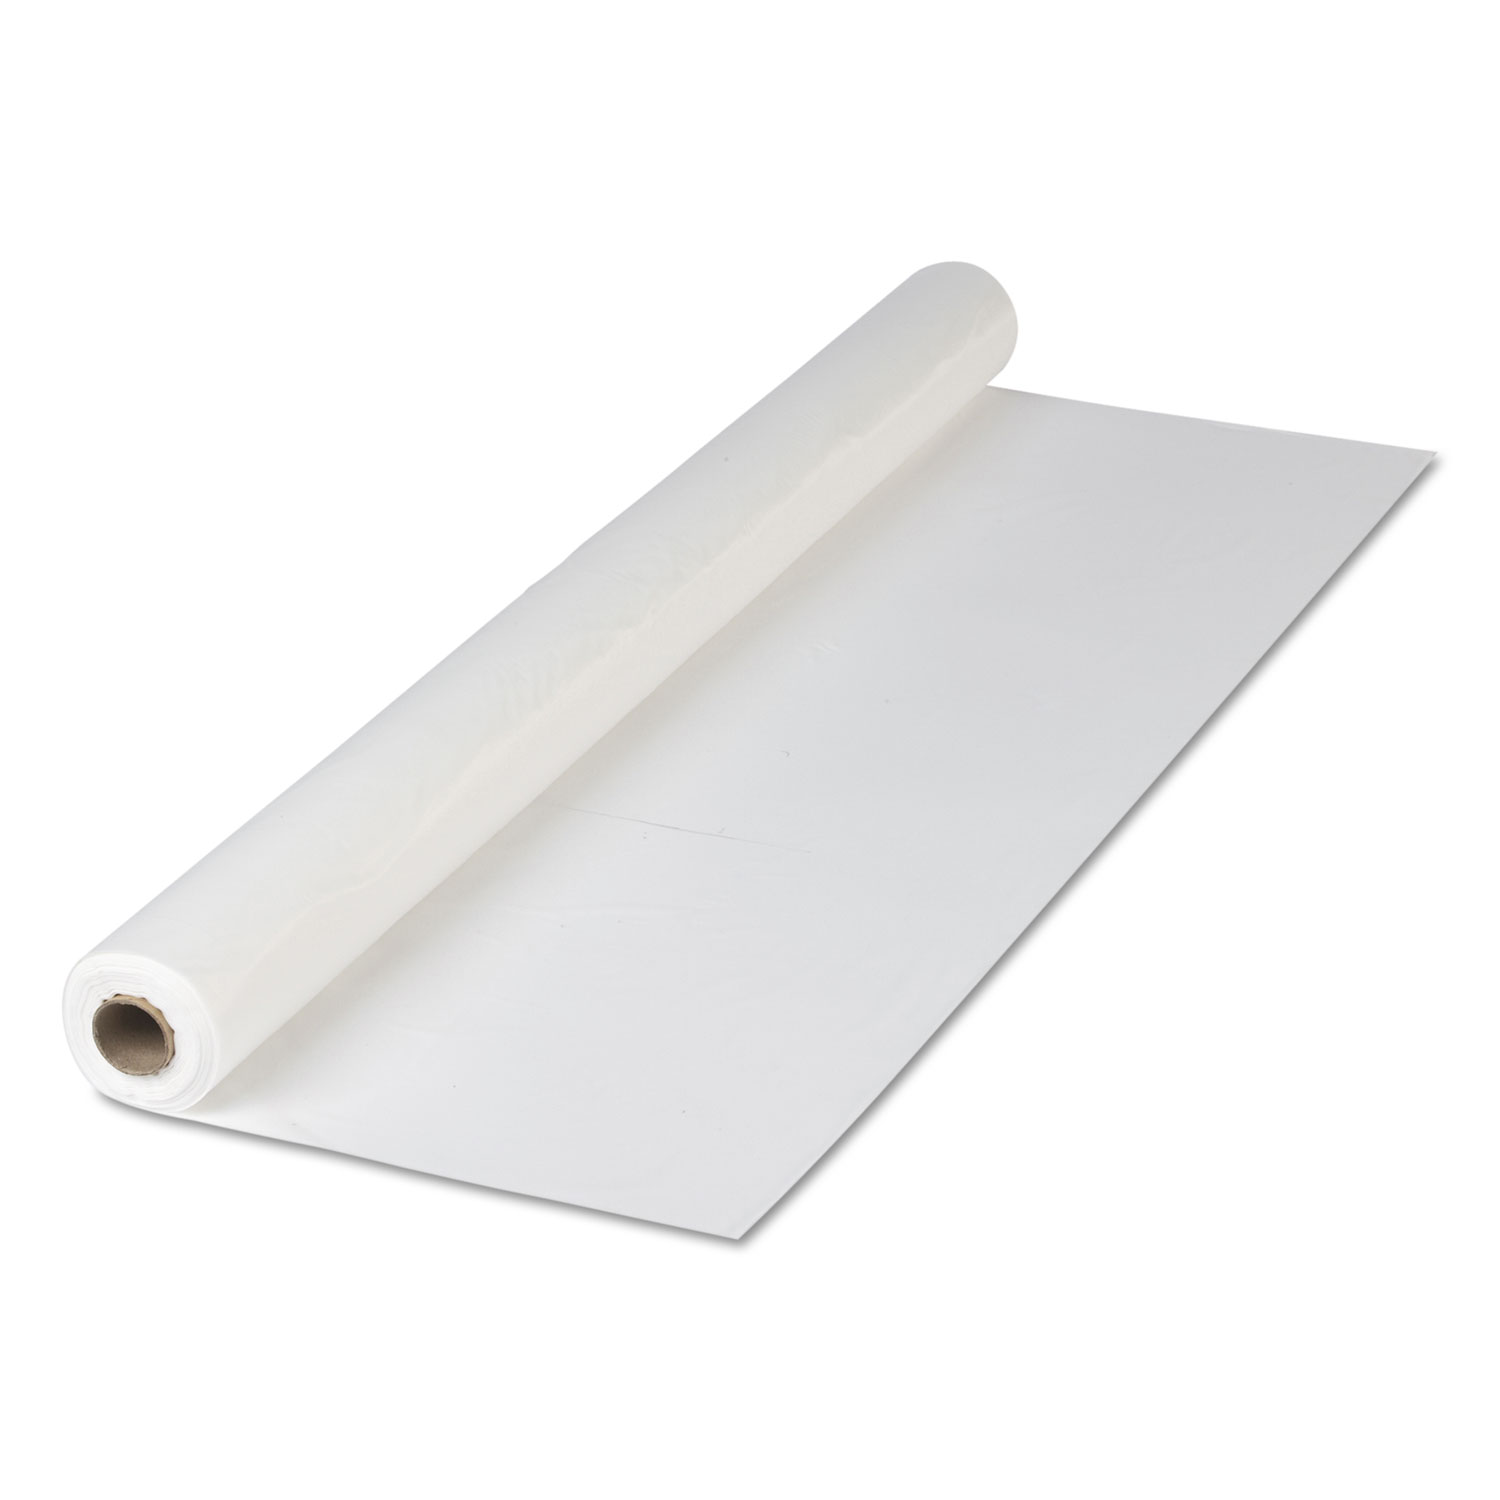  Hoffmaster 114000 Plastic Roll Tablecover, 40 x 300 ft, White (HFM114000) 